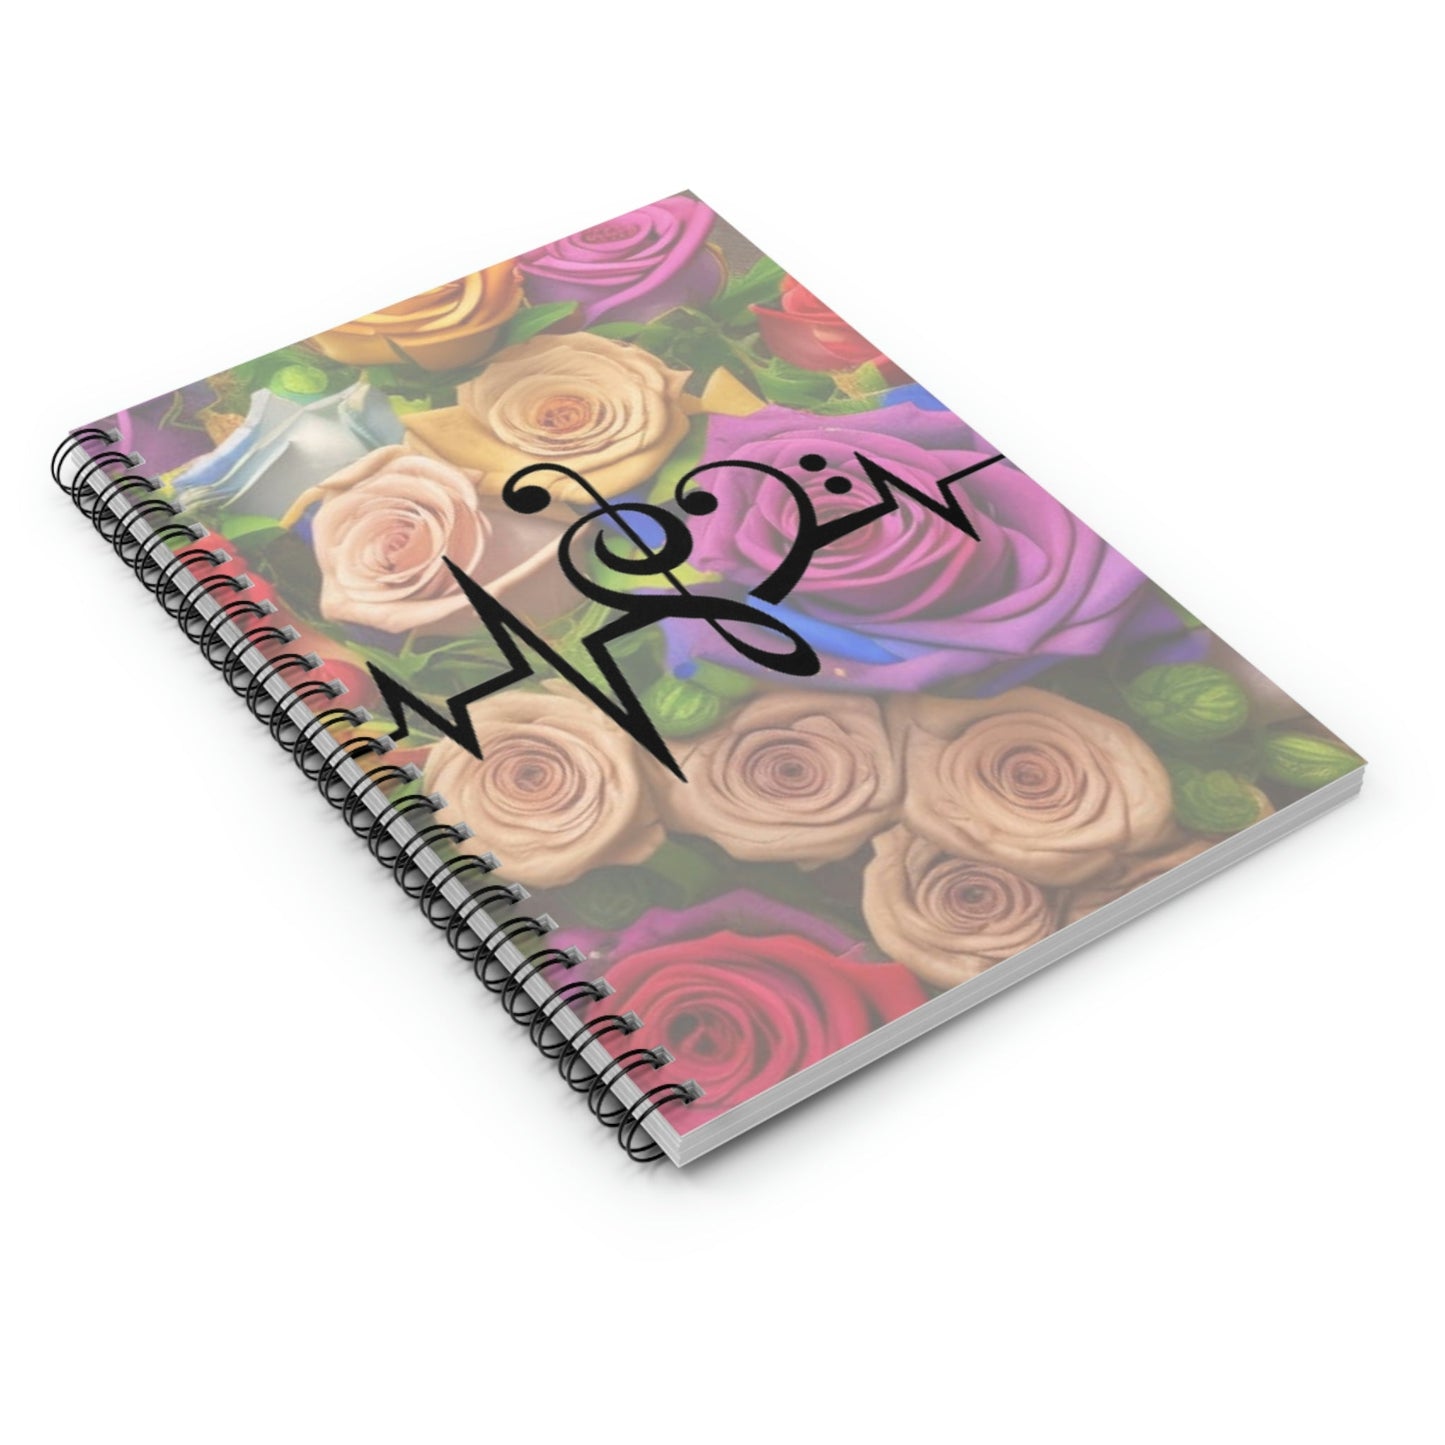 Paper Products - Trebel Note The Love Of Music Spiral Notebook - Ruled Line